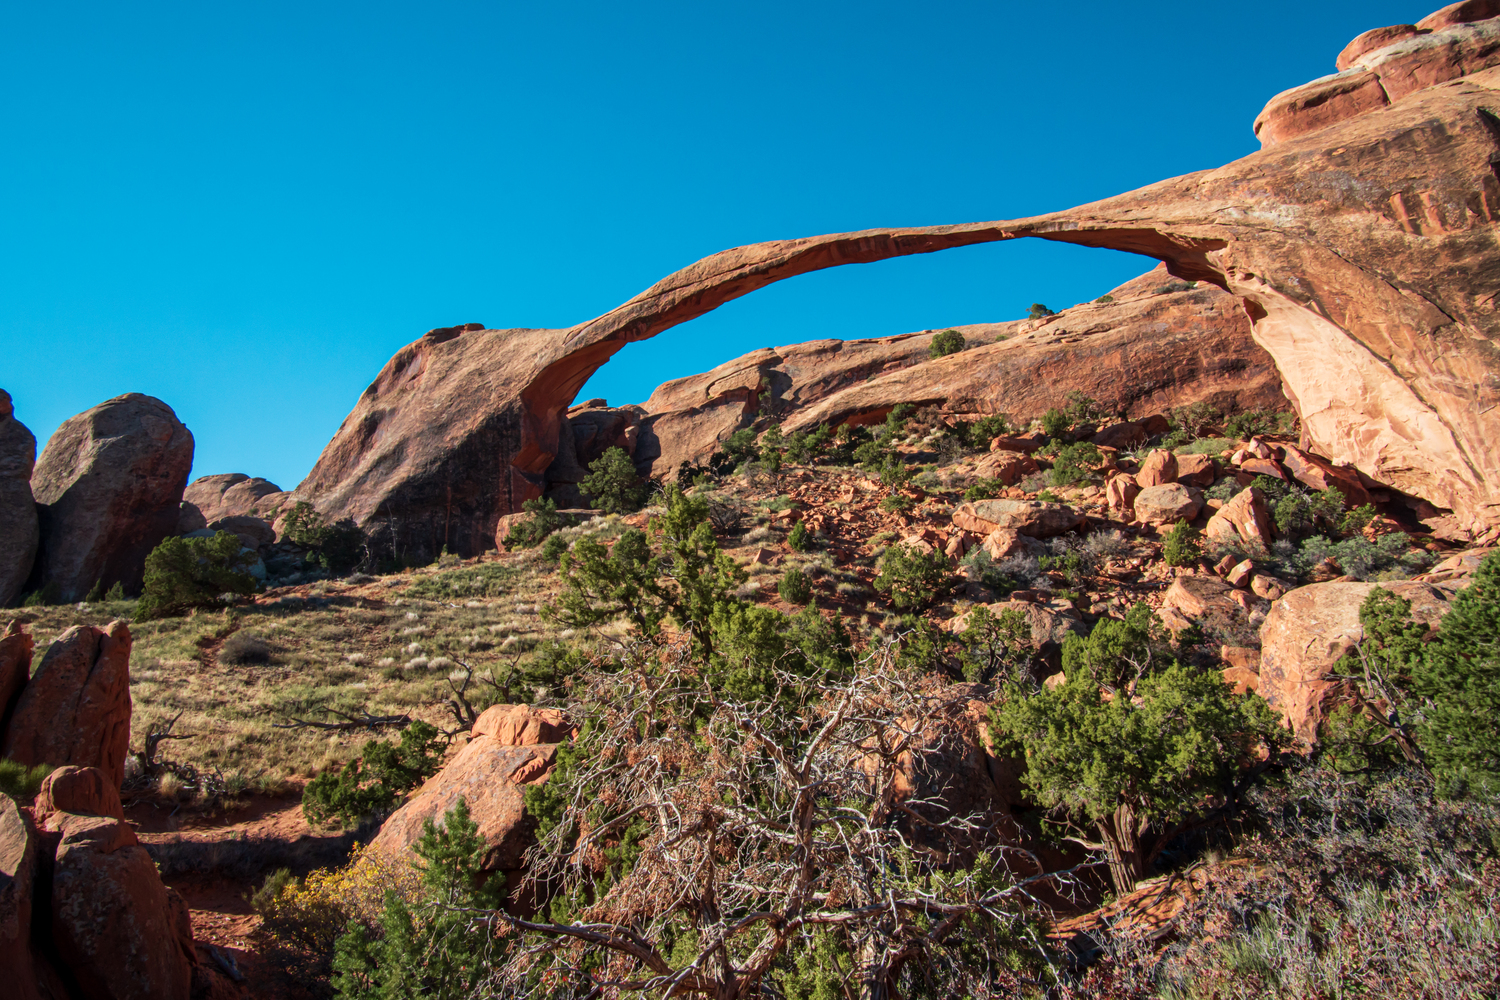 The Landscape Arch at Arches National Park.